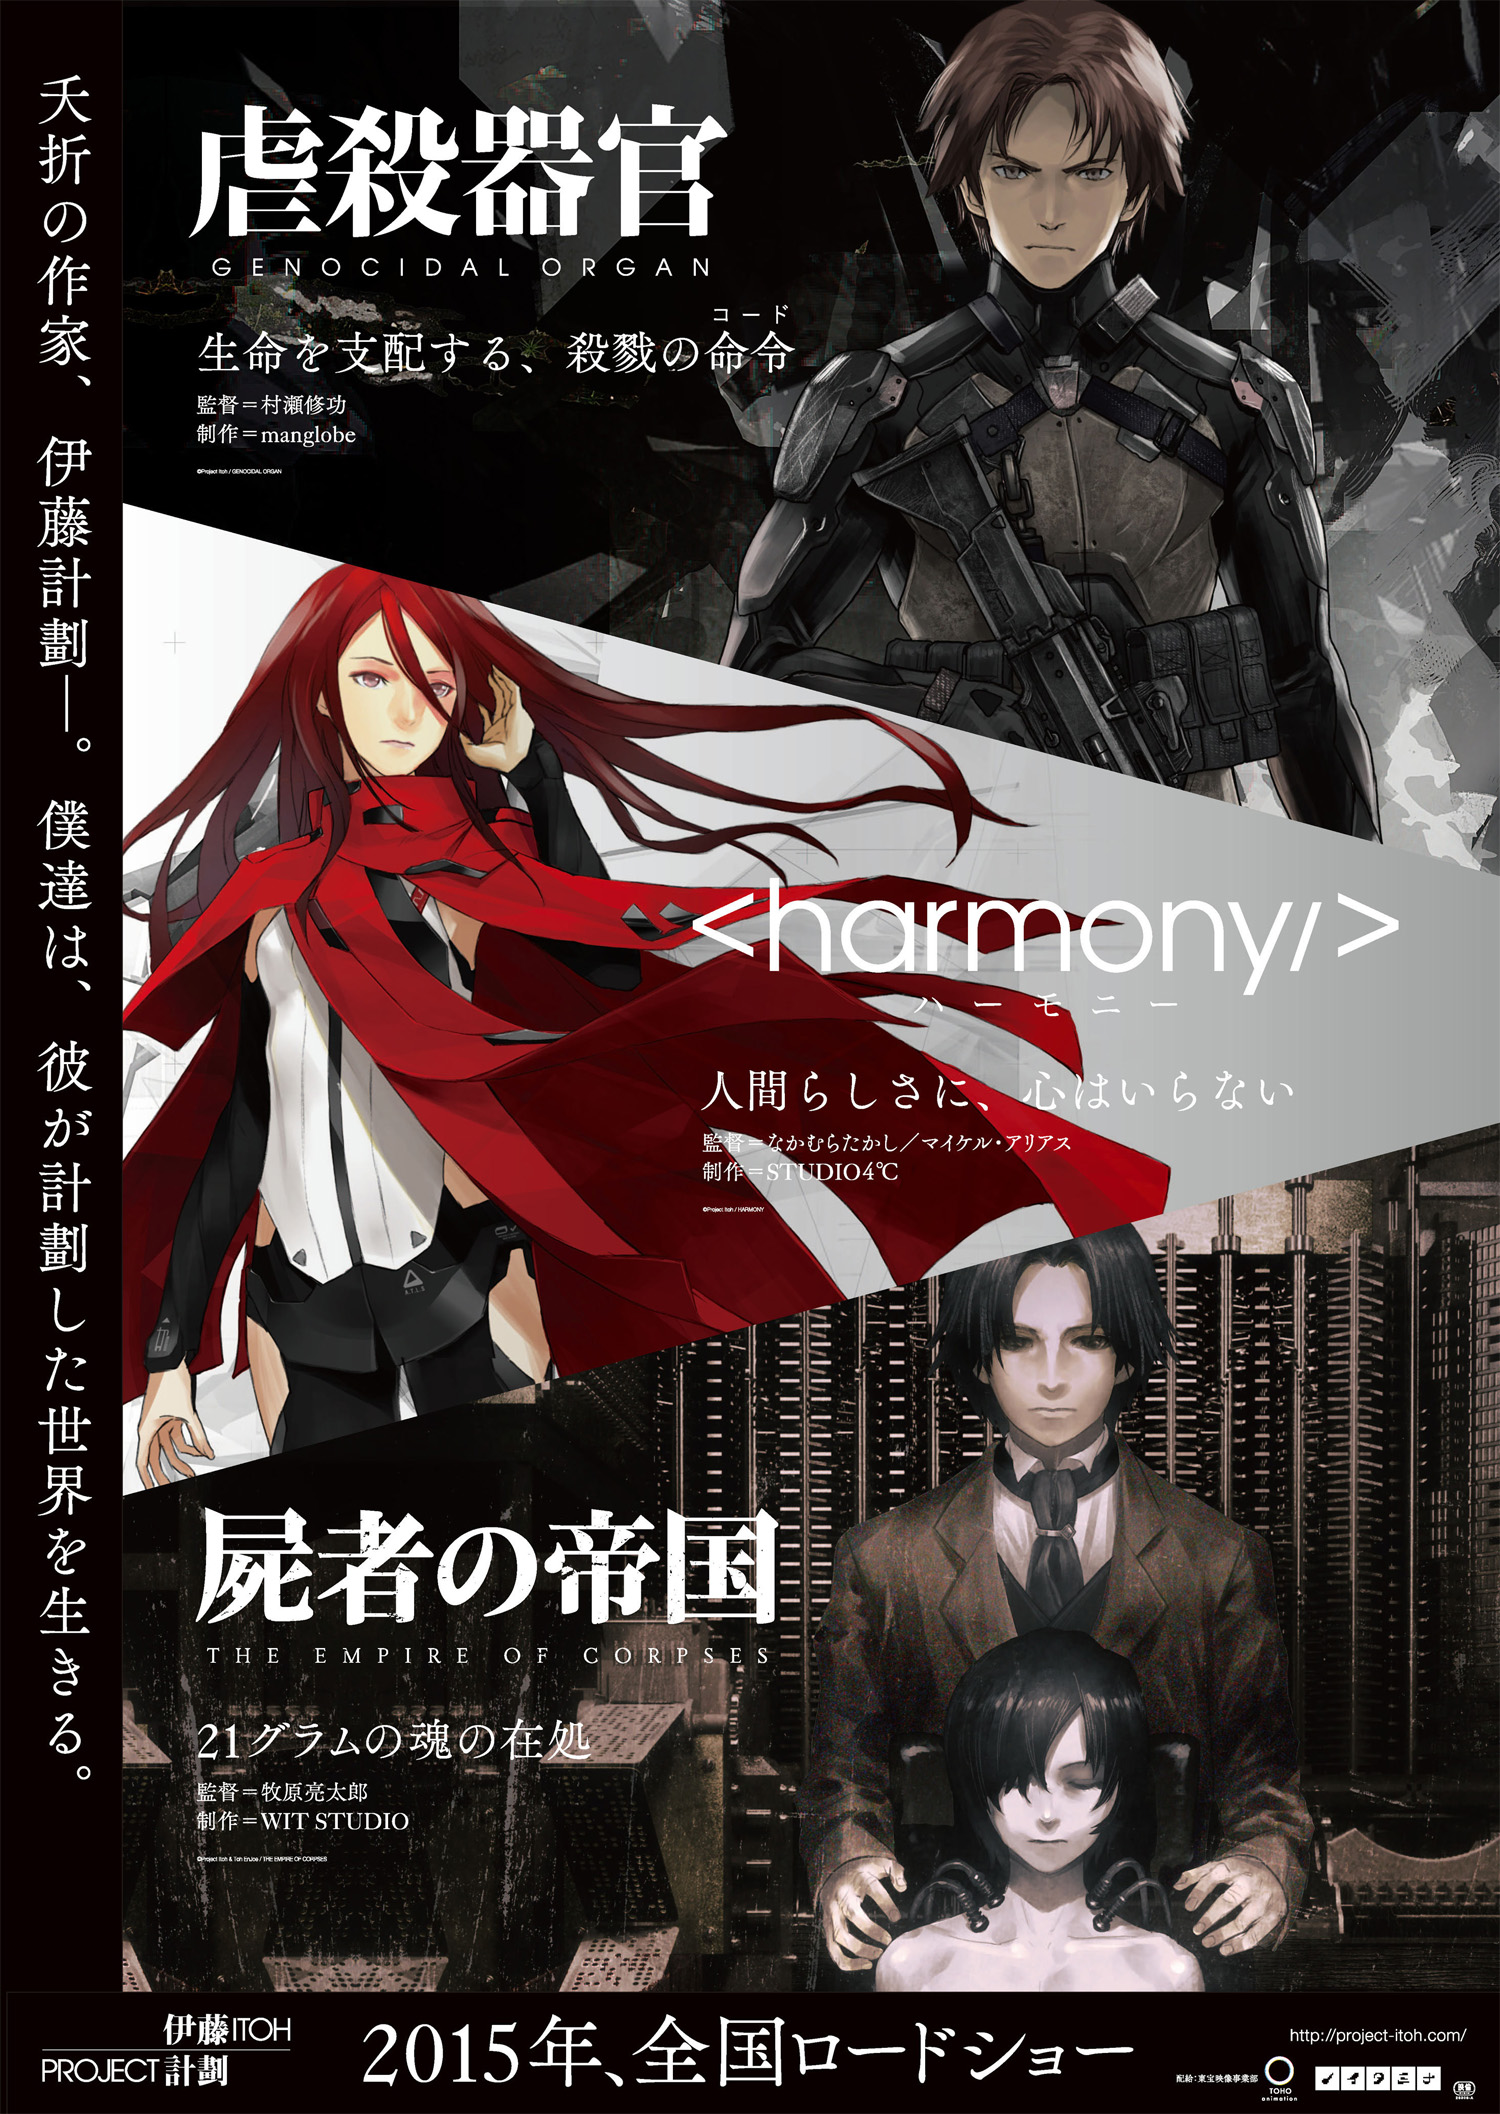 The Empire Of Corpses #1